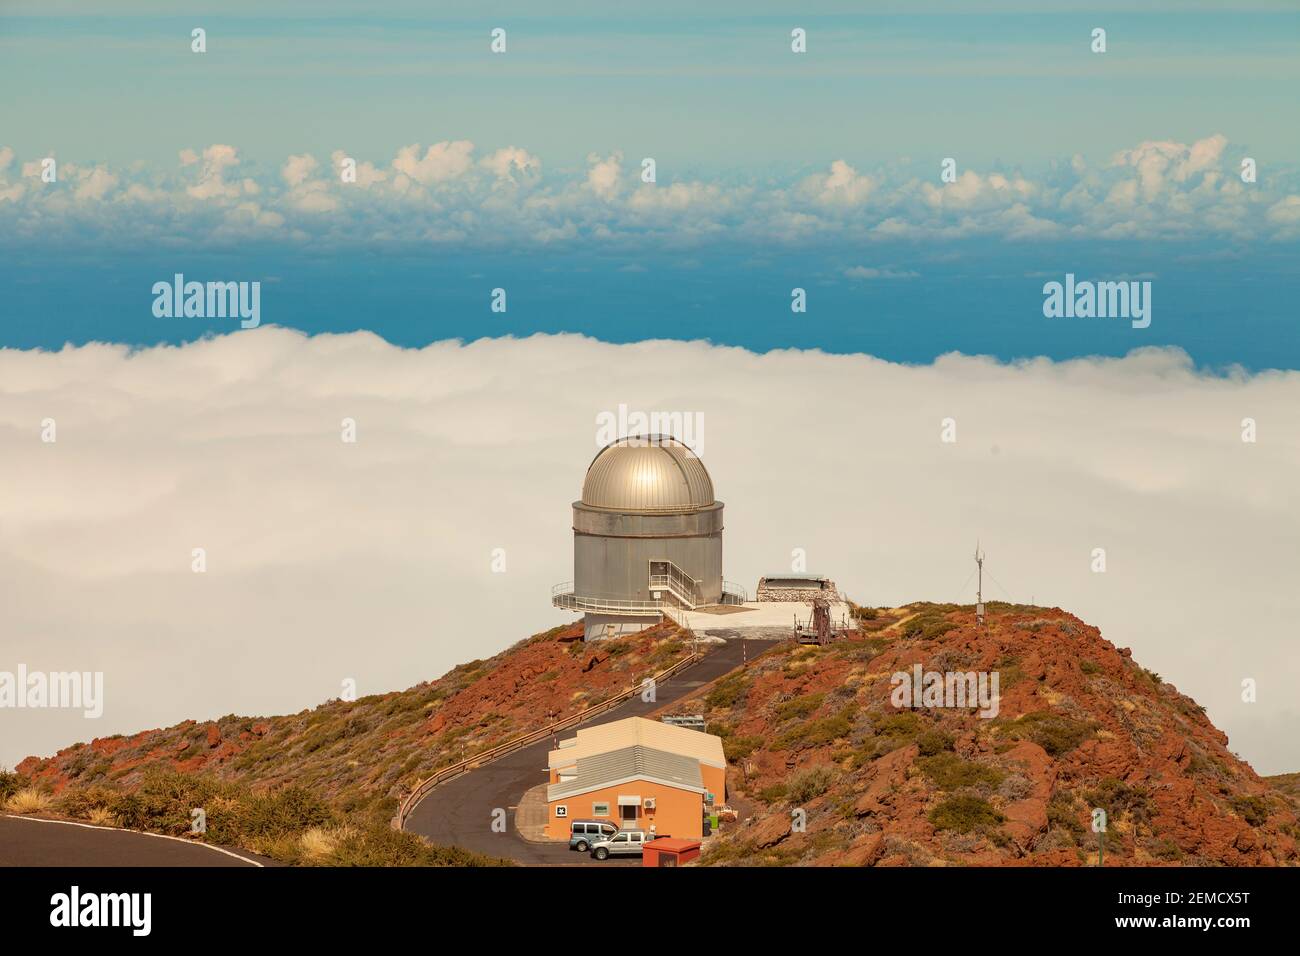 La Palma, Spain - November 1, 2016: Nordic Optical Telescope at the Roque de los Muchachos Observatory, ORM, astronomical observatory located in the m Stock Photo